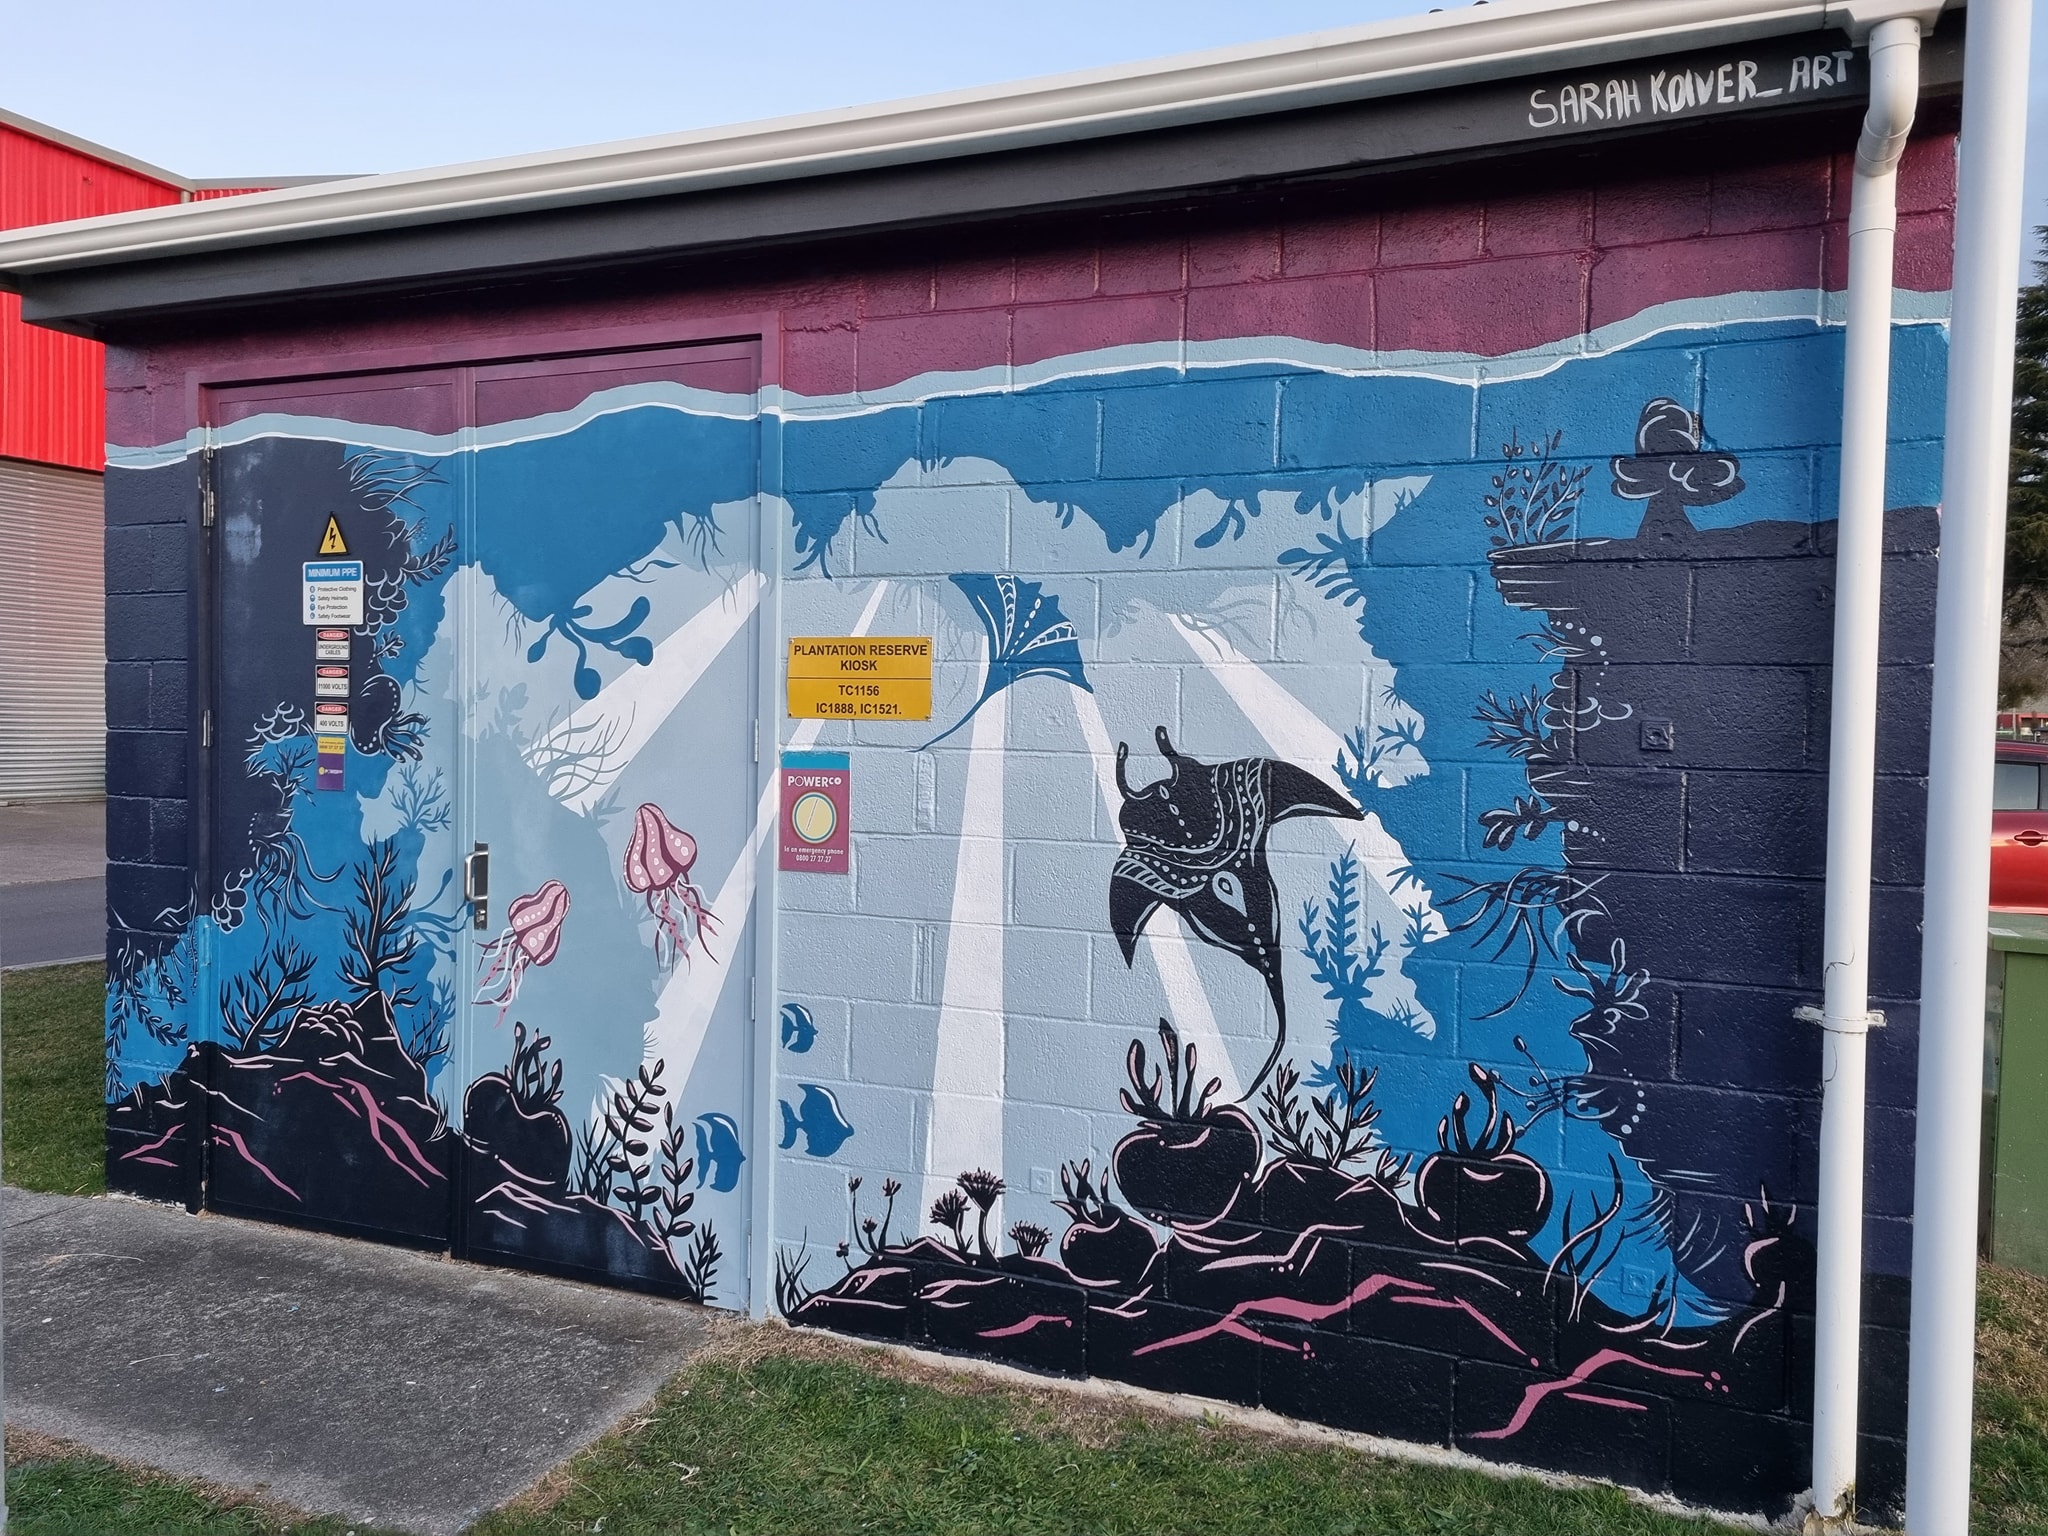 Mural on the side of a small concrete block building, showing underwater scene, including stingrays.